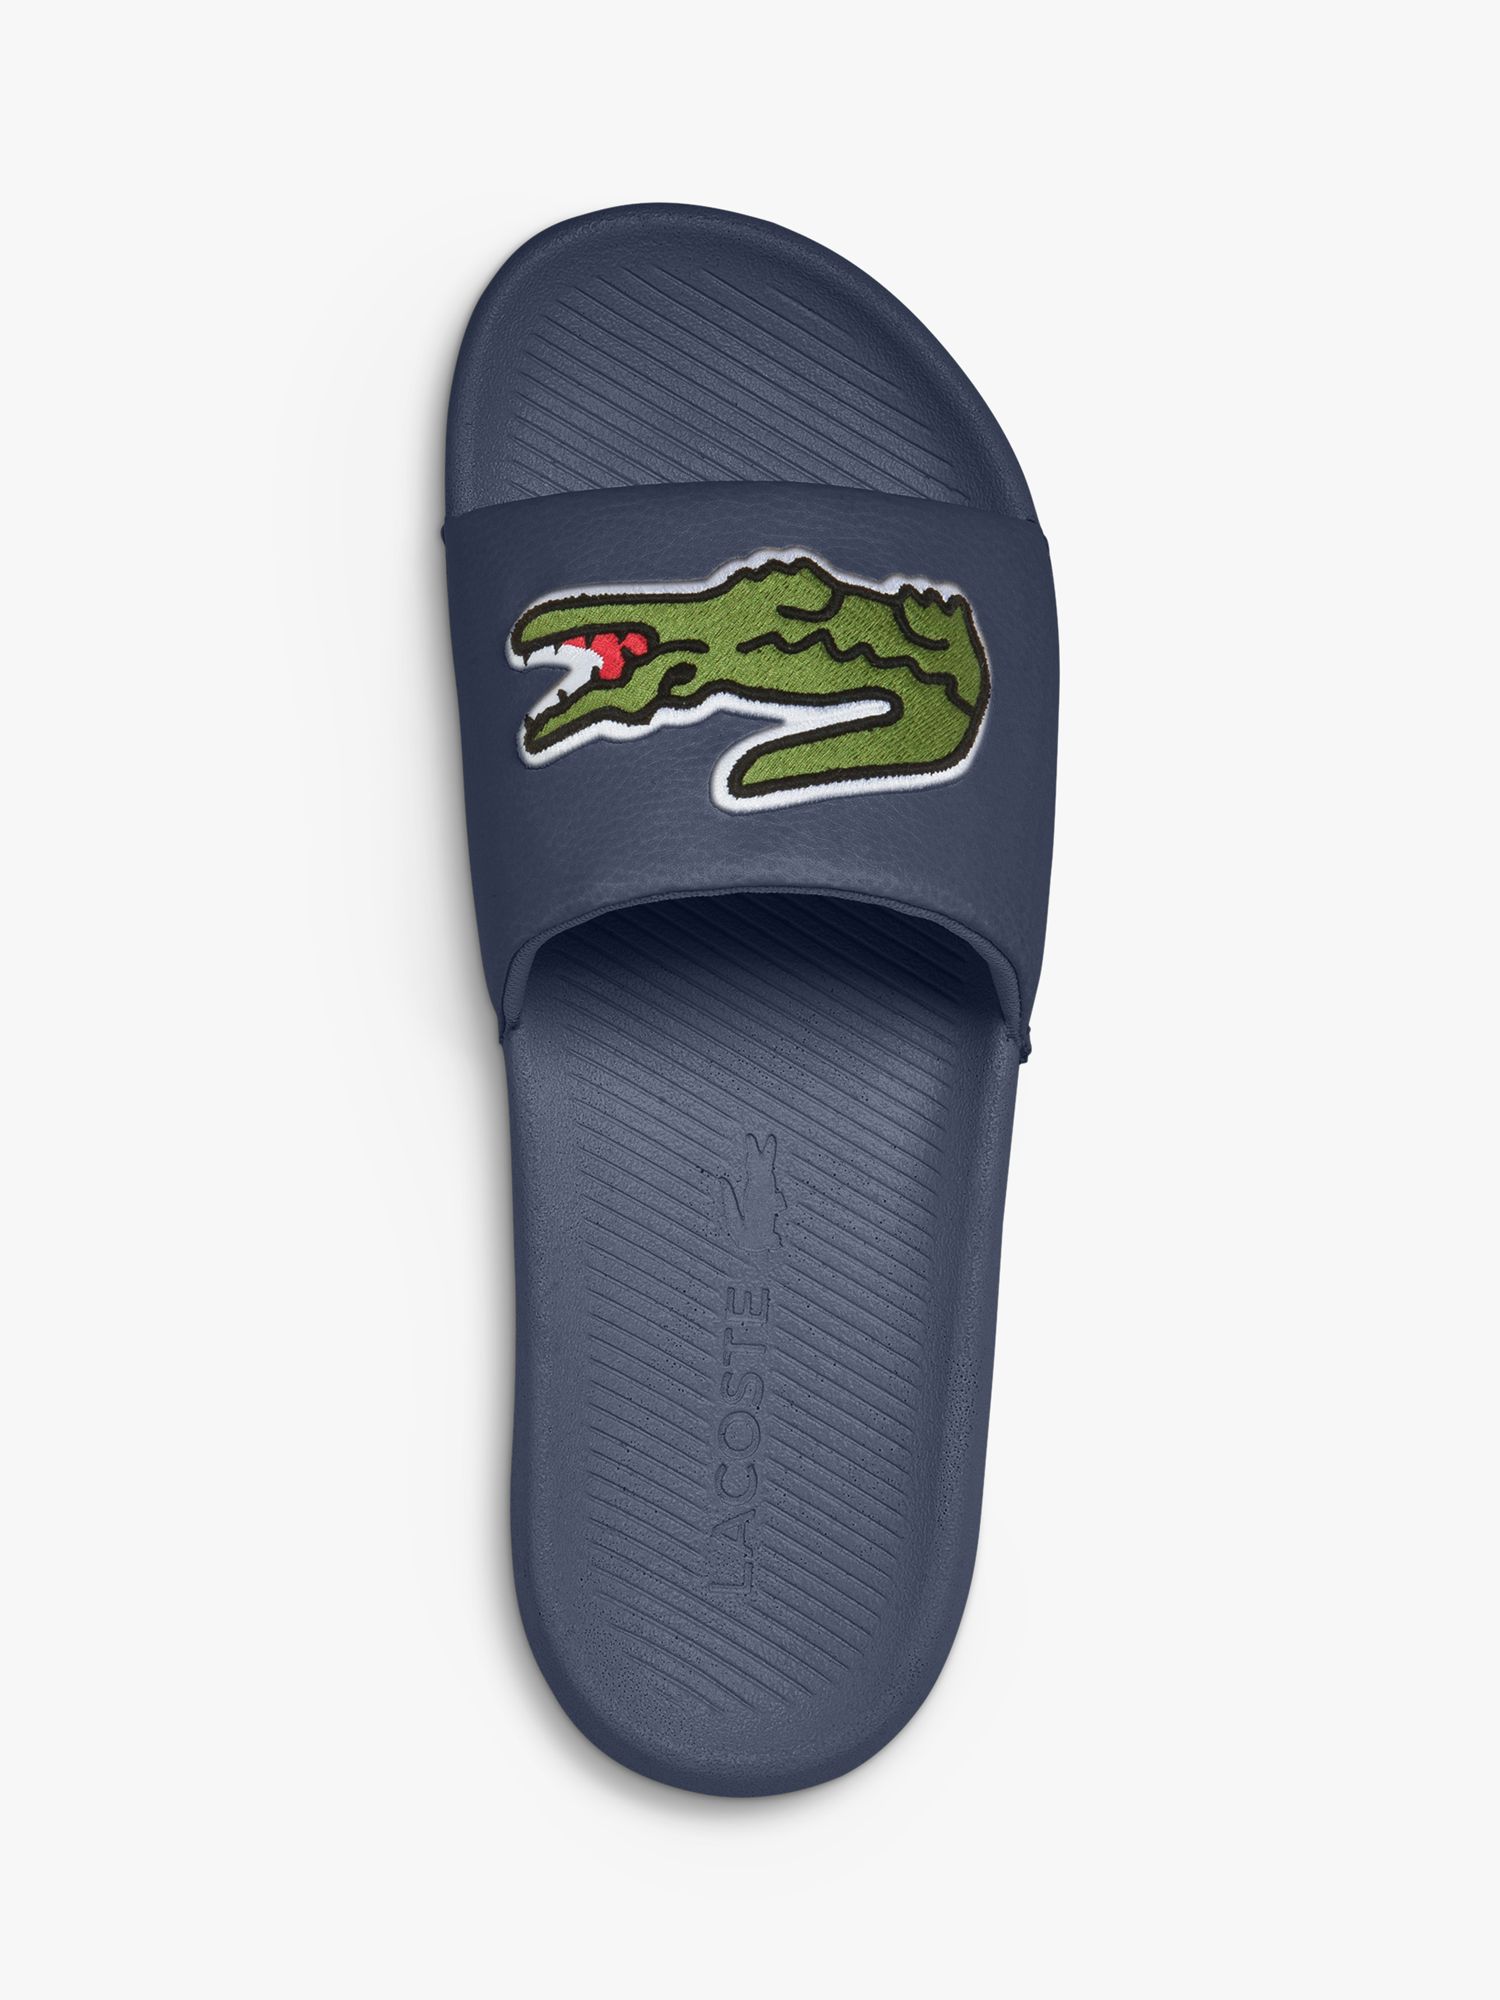 Lacoste Croco Synthetic Sliders, Navy at John Lewis & Partners